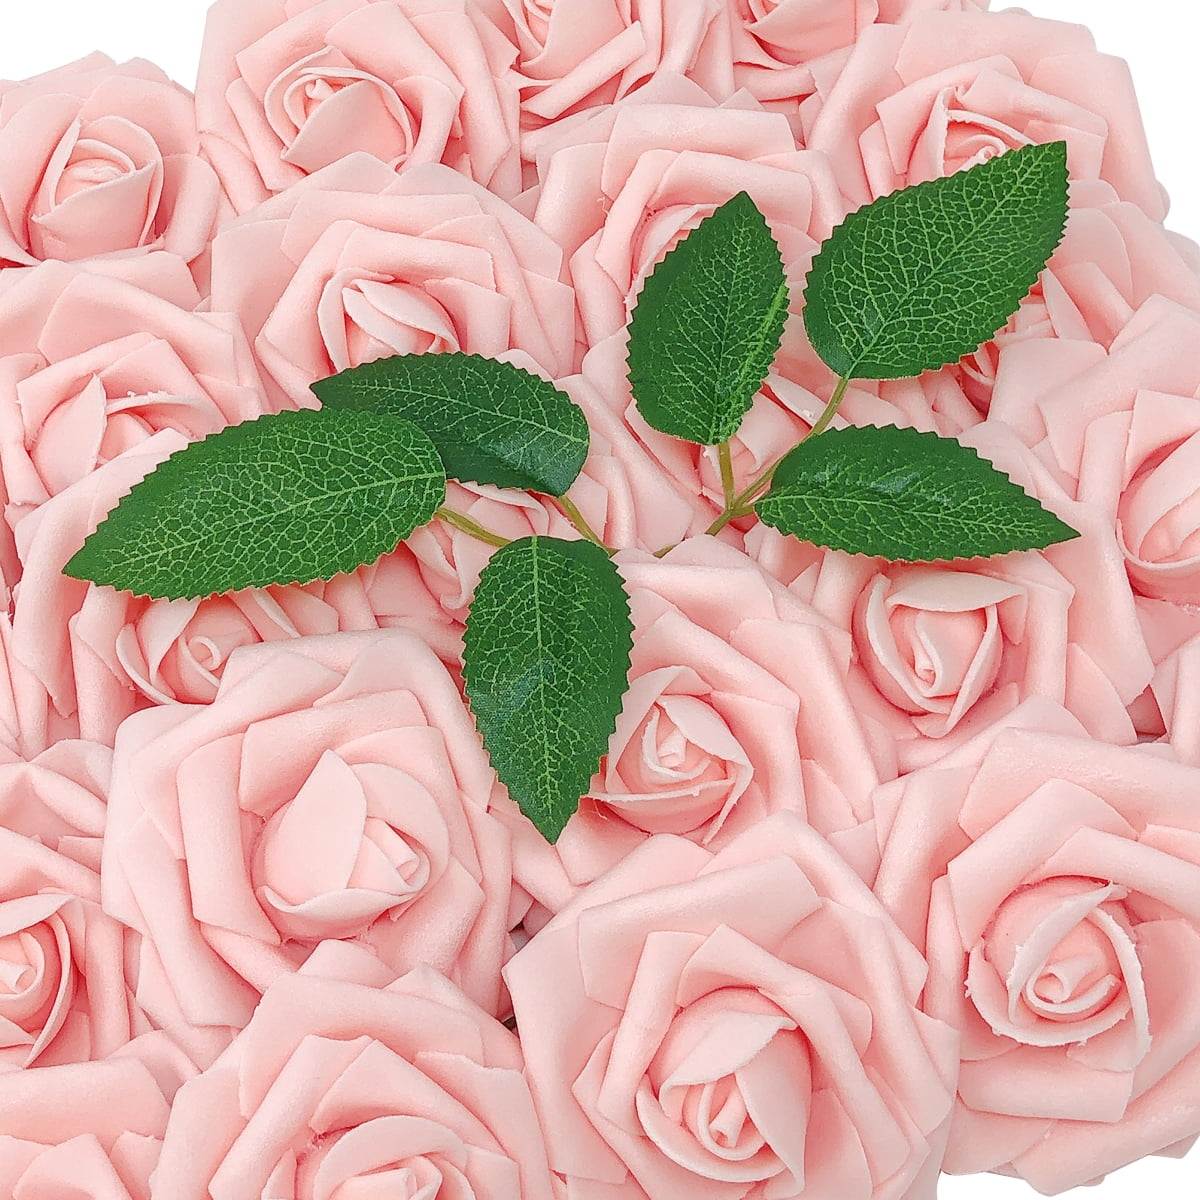 15 Head Real Latex Touch Rose Flower For wedding And Home Design Bouquet Decor,. 